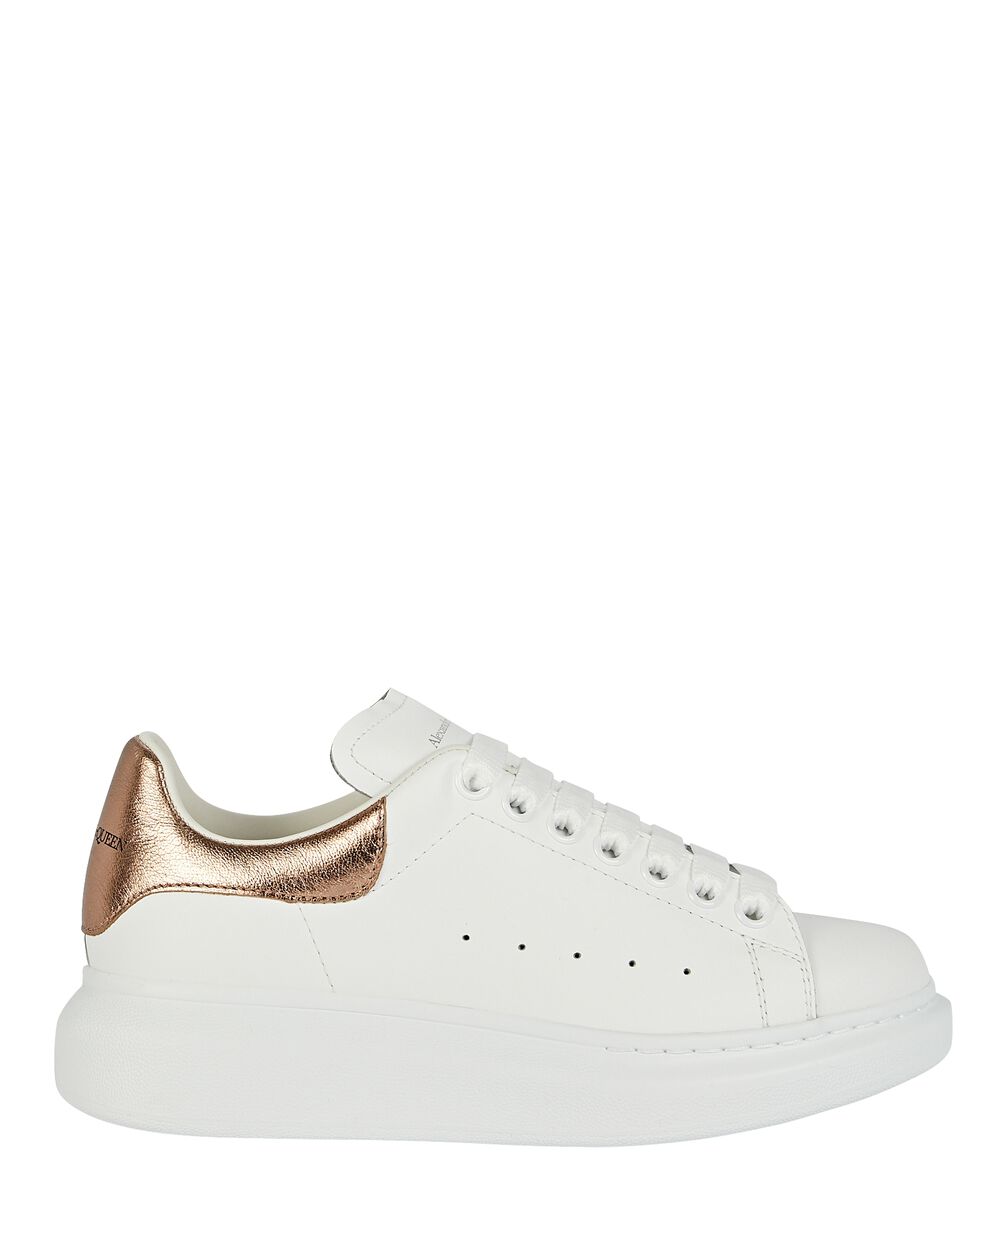 Alexander McQueen Sneakers With Platform And Metallic Fuchsia Heel Tab In  Leather in White